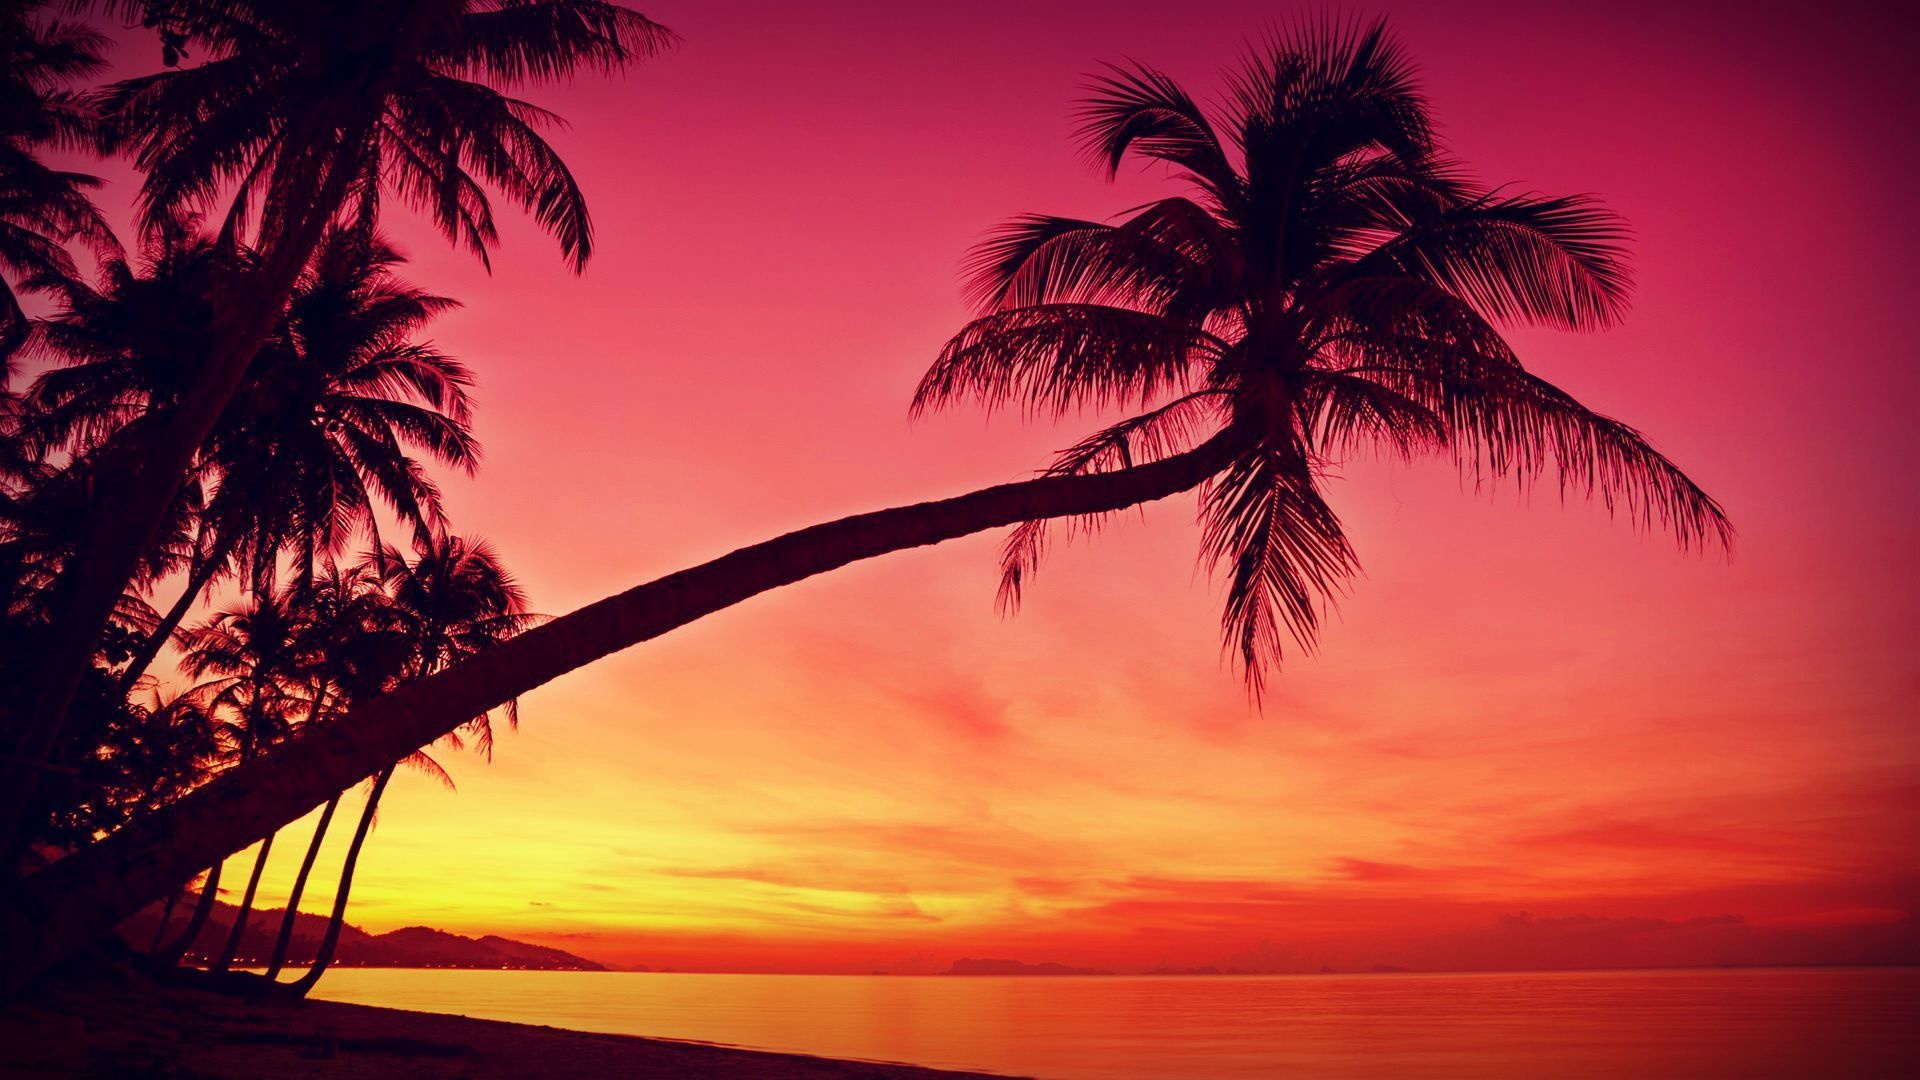 Sunset palm tree wallpapers, Vibrant sunset hues, Tropical paradise, Tranquil palm trees, 1920x1080 Full HD Desktop